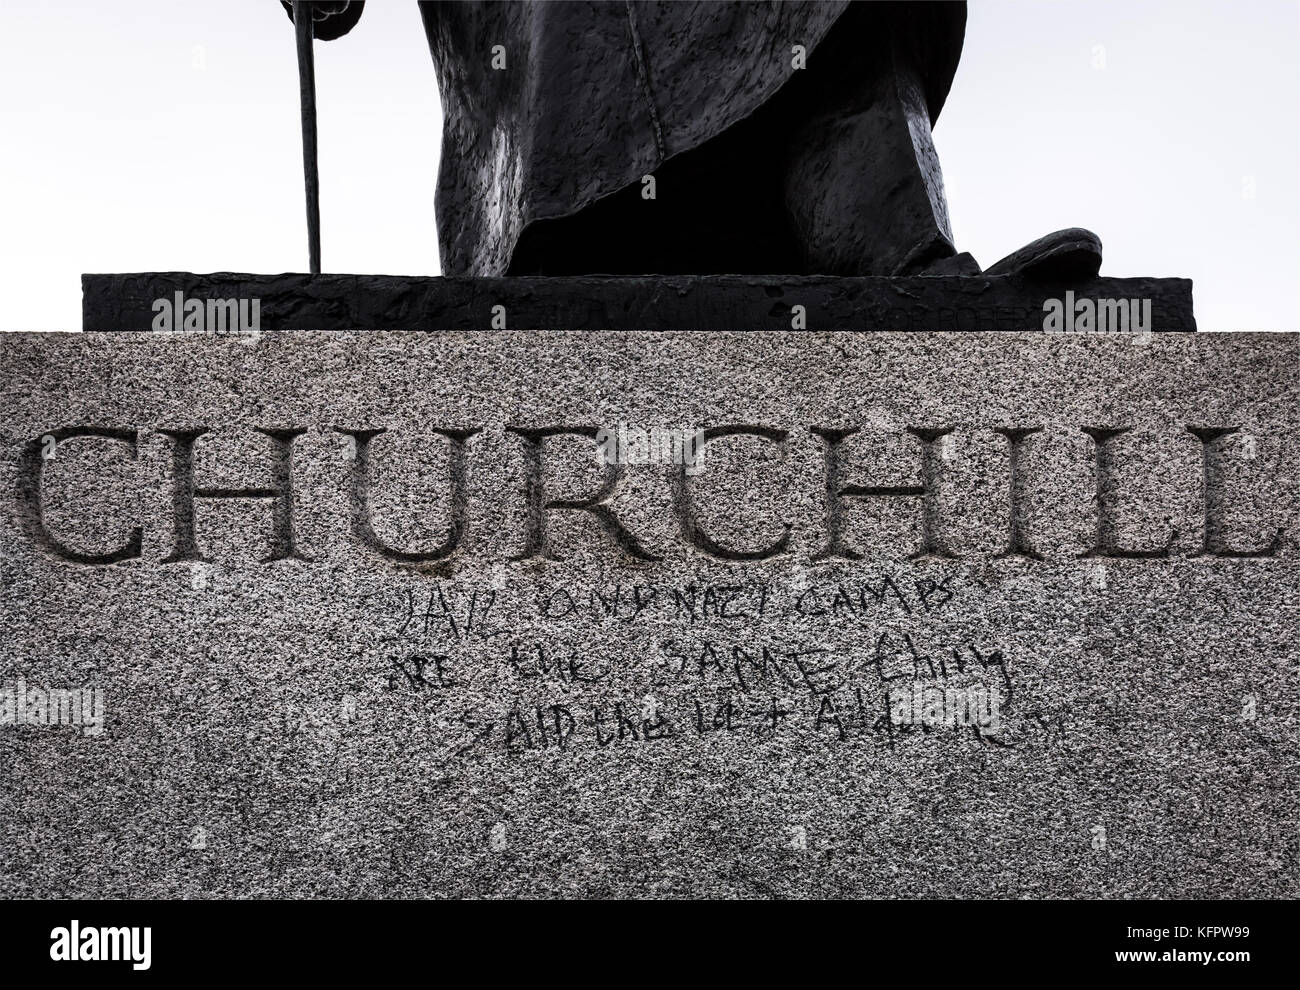 London, UK. 31st Oct, 2017. Statue of Winston Churchill in Parliament Square with graffiti reading “jail and nazi camps are the same thing” written by a Calais Jungle protester who was later arrested on suspicion of criminal damage and taken to a central London police station. Credit: Guy Corbishley/Alamy Live News Stock Photo